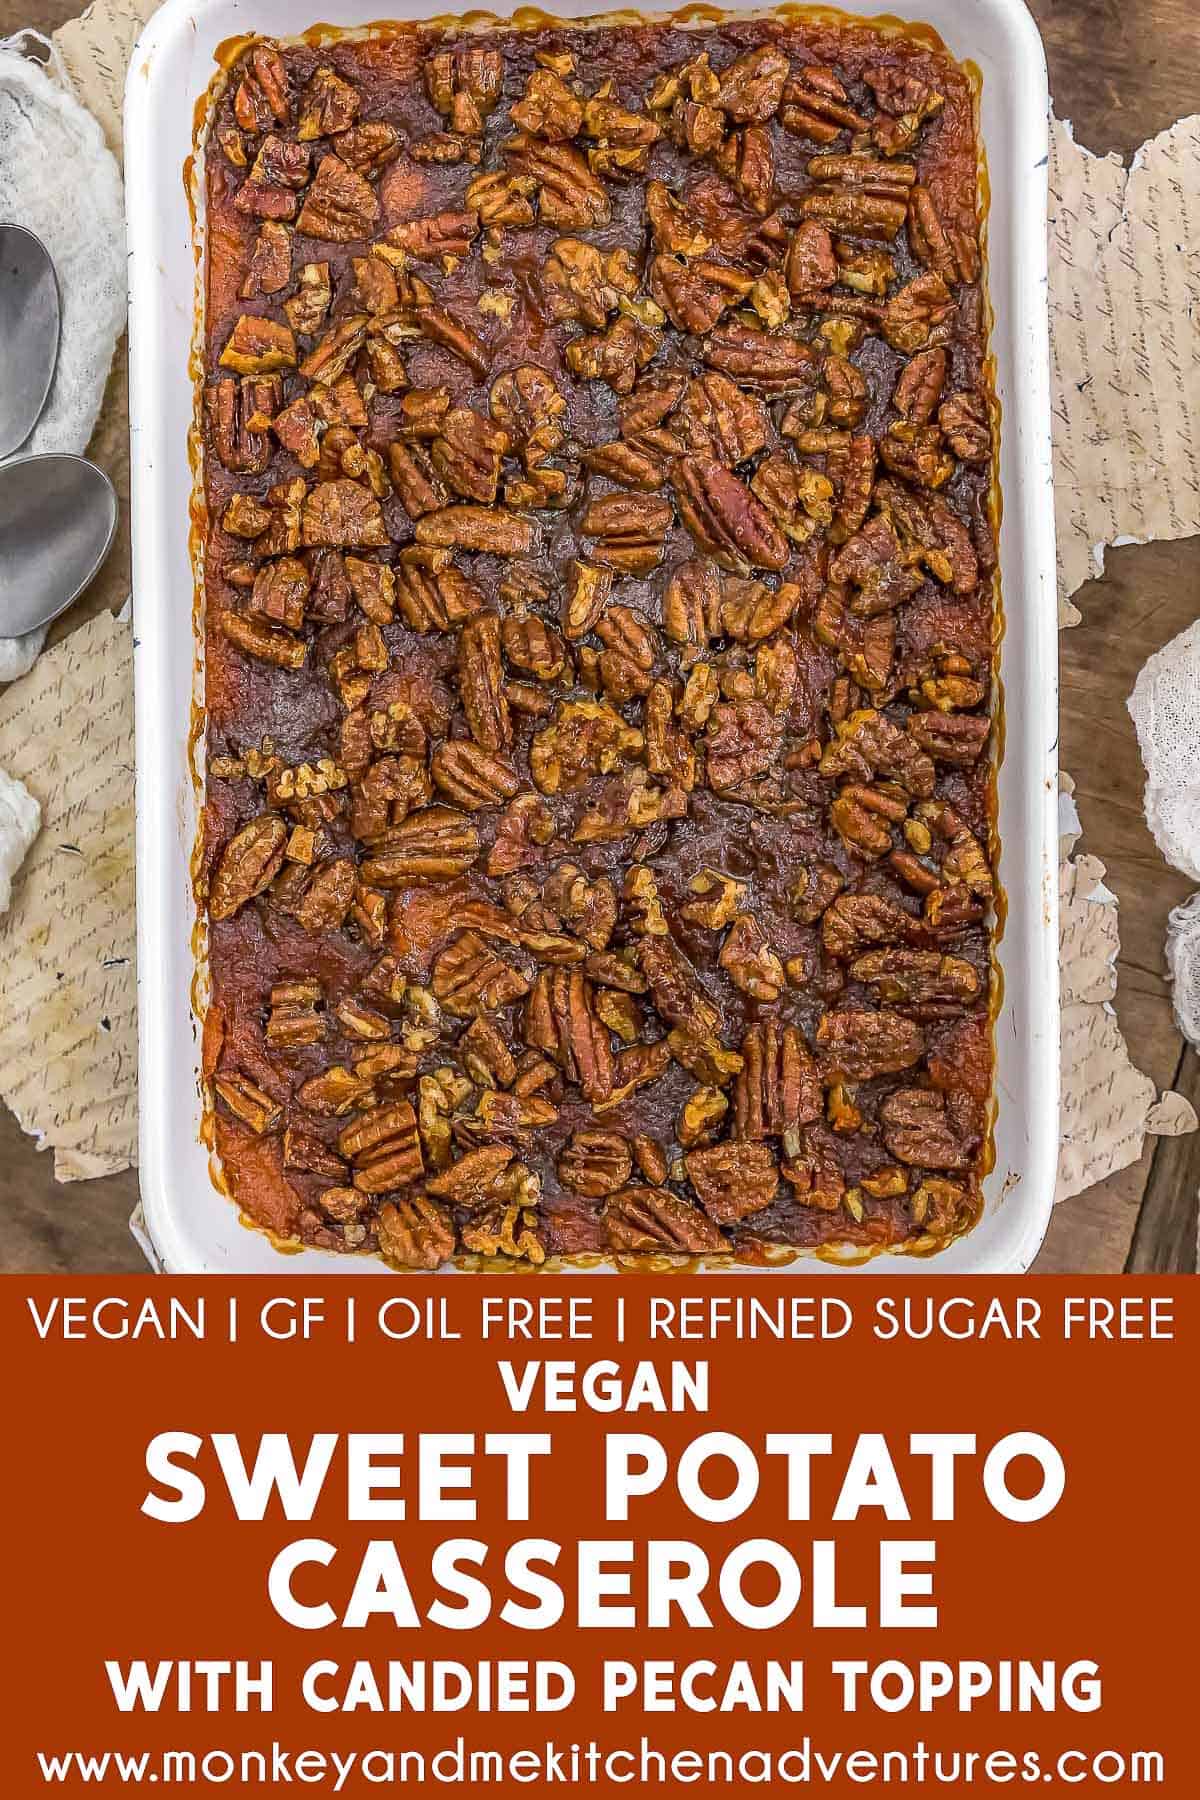 Vegan Sweet Potato Casserole with Candied Pecan Topping with text description